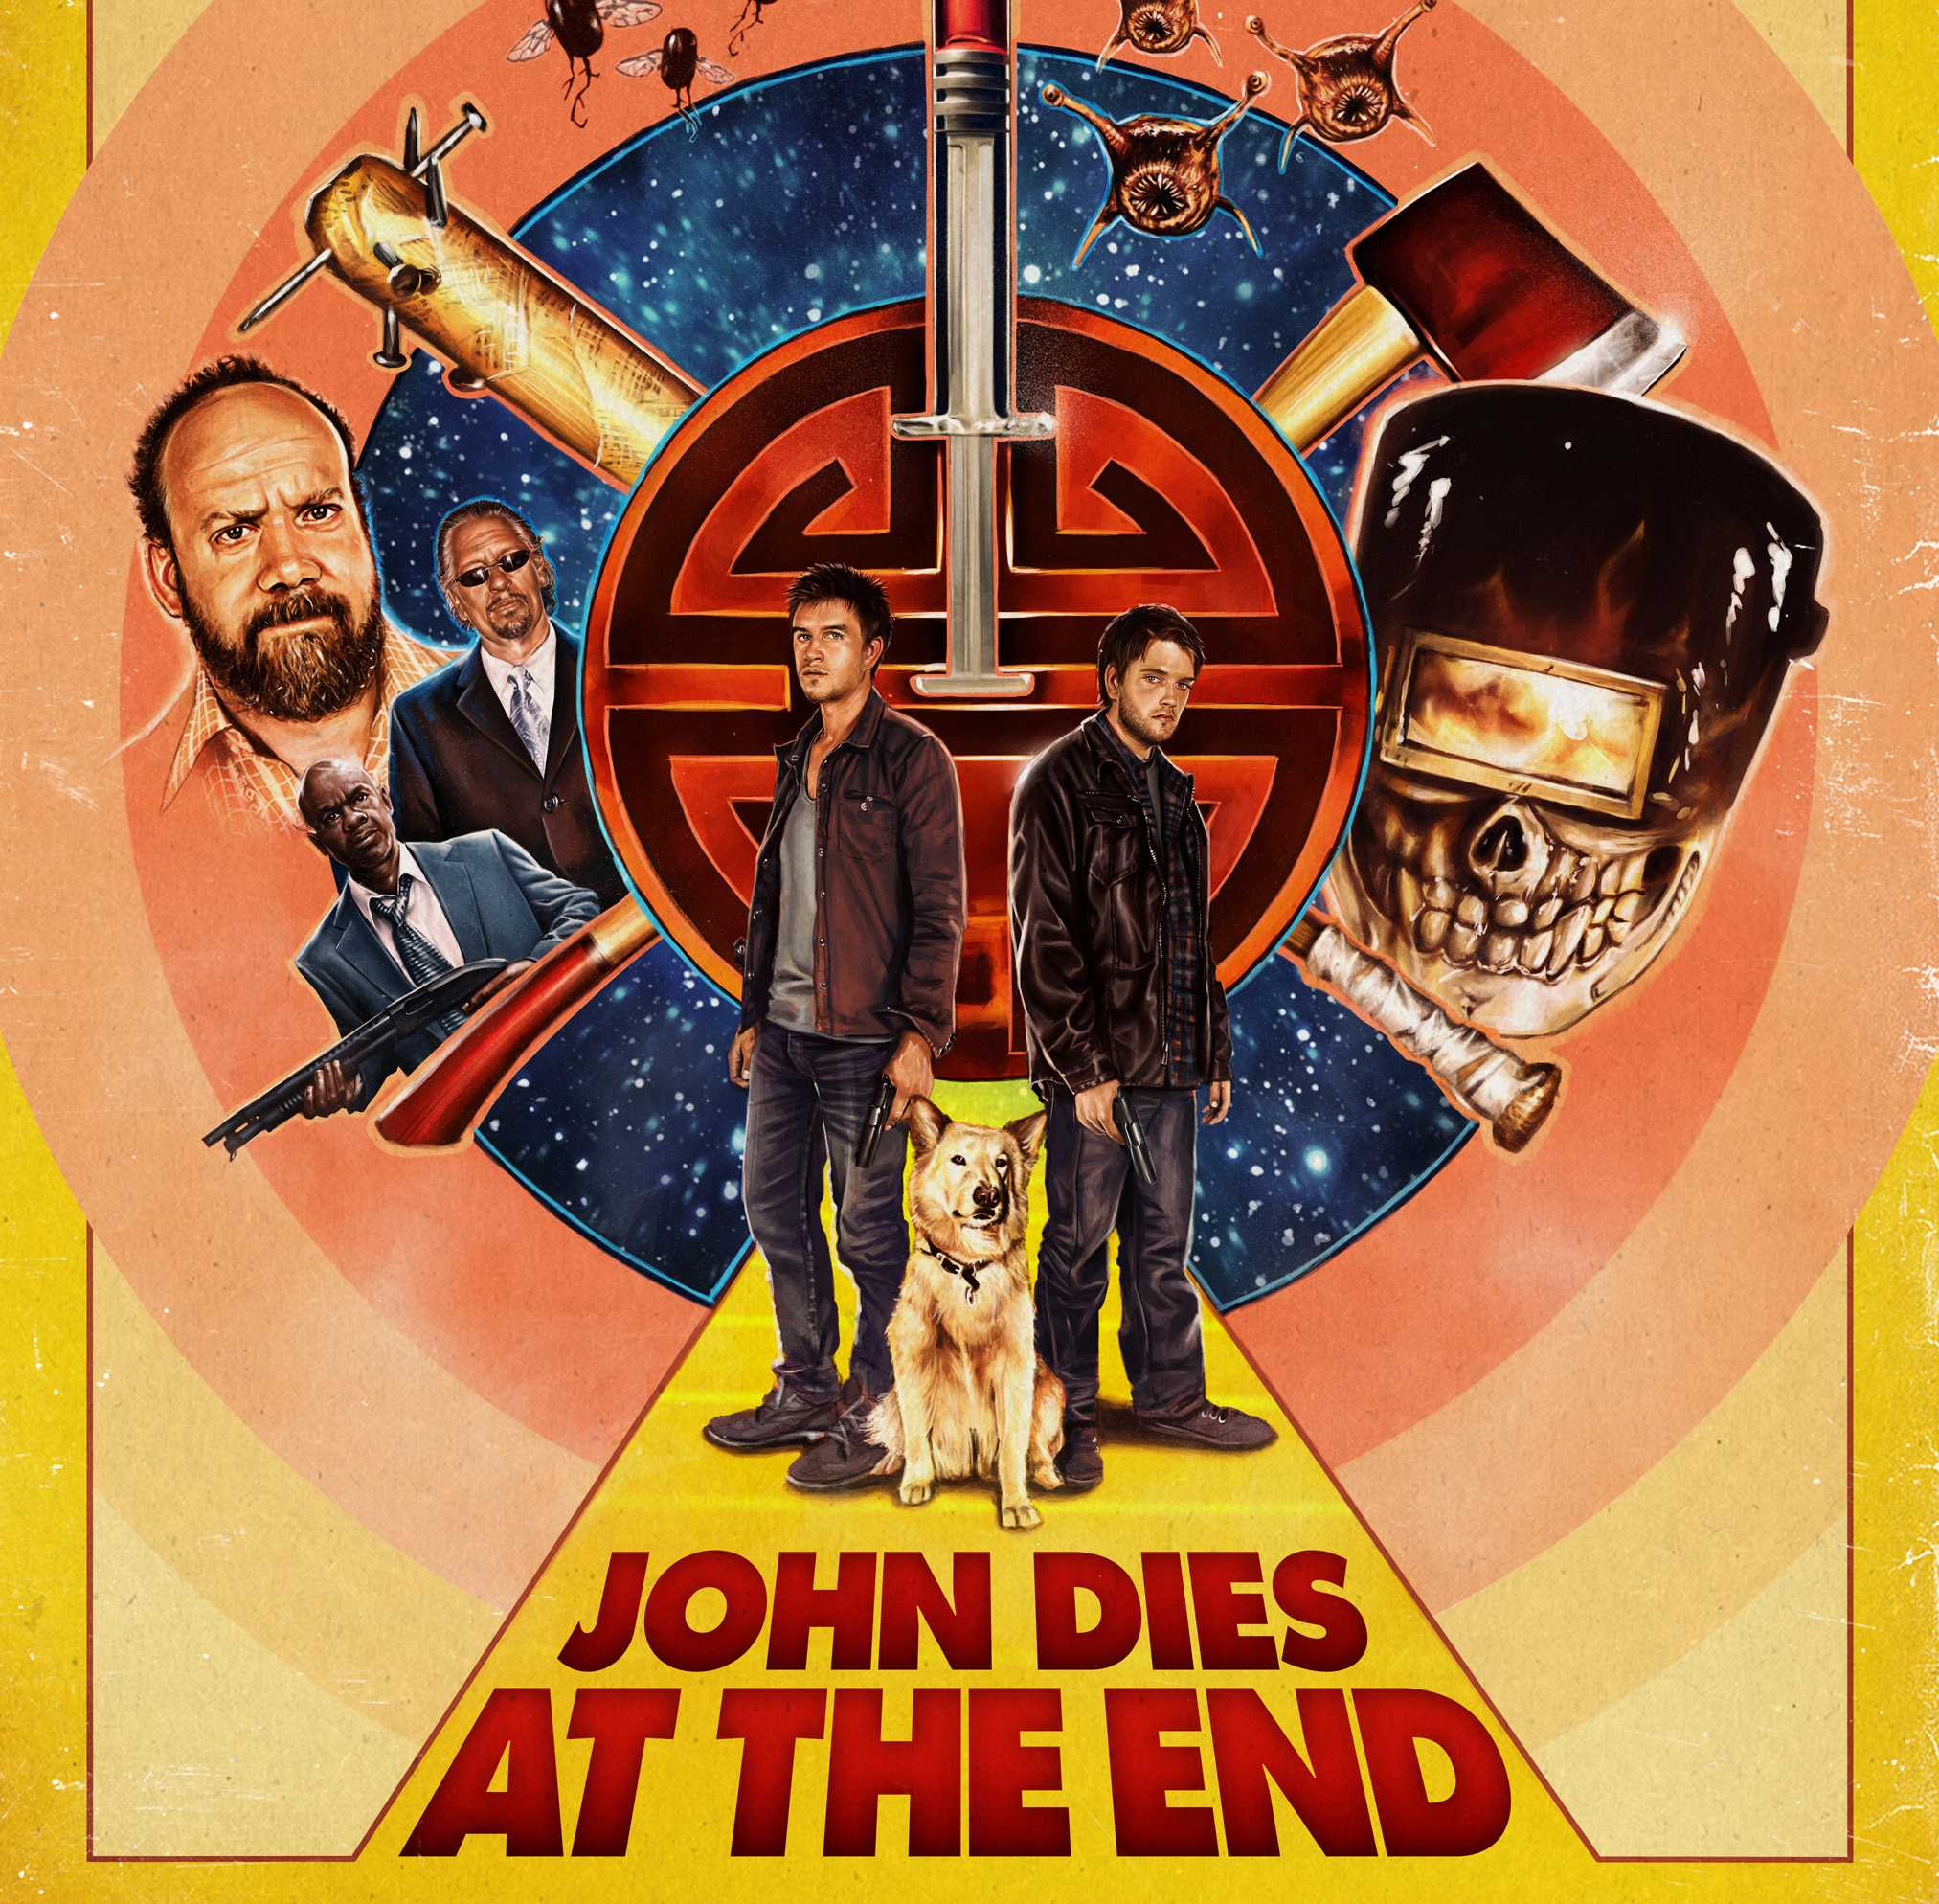 John Dies at the End Review: Face the Unimaginable